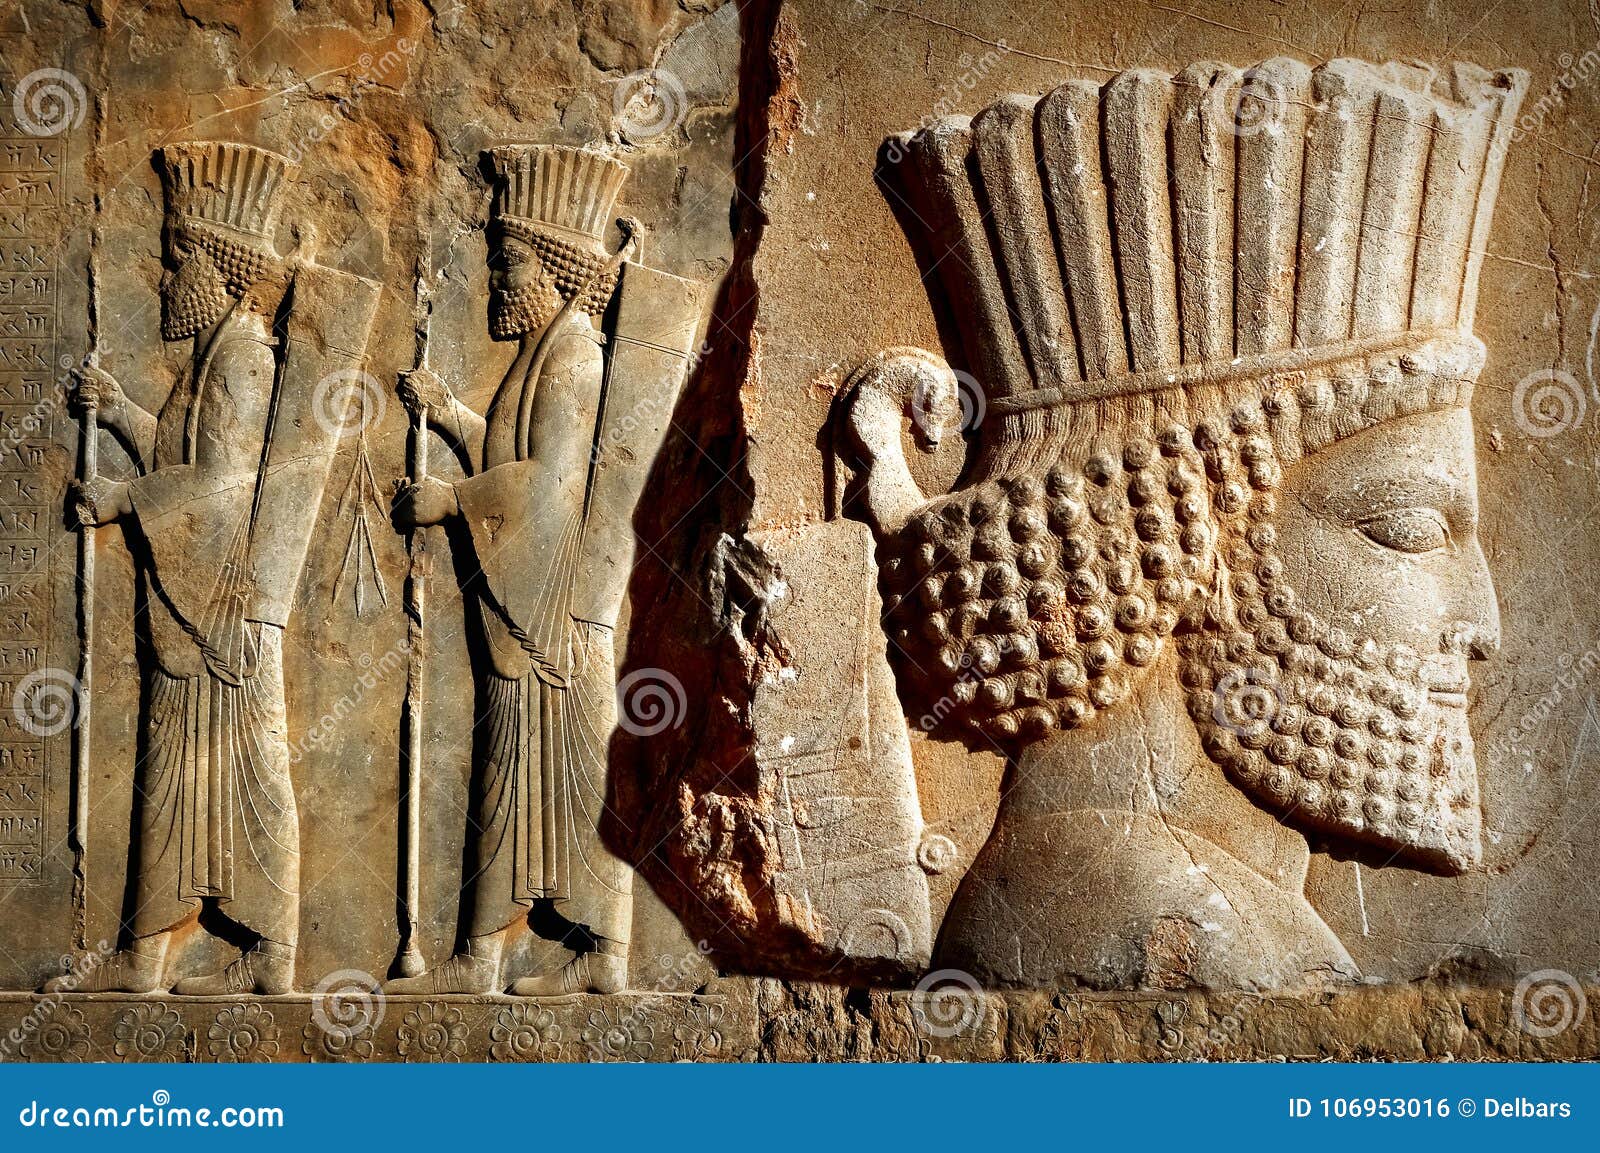 persepolis is the capital of the ancient achaemenid kingdom. sight of iran. ancient persia.